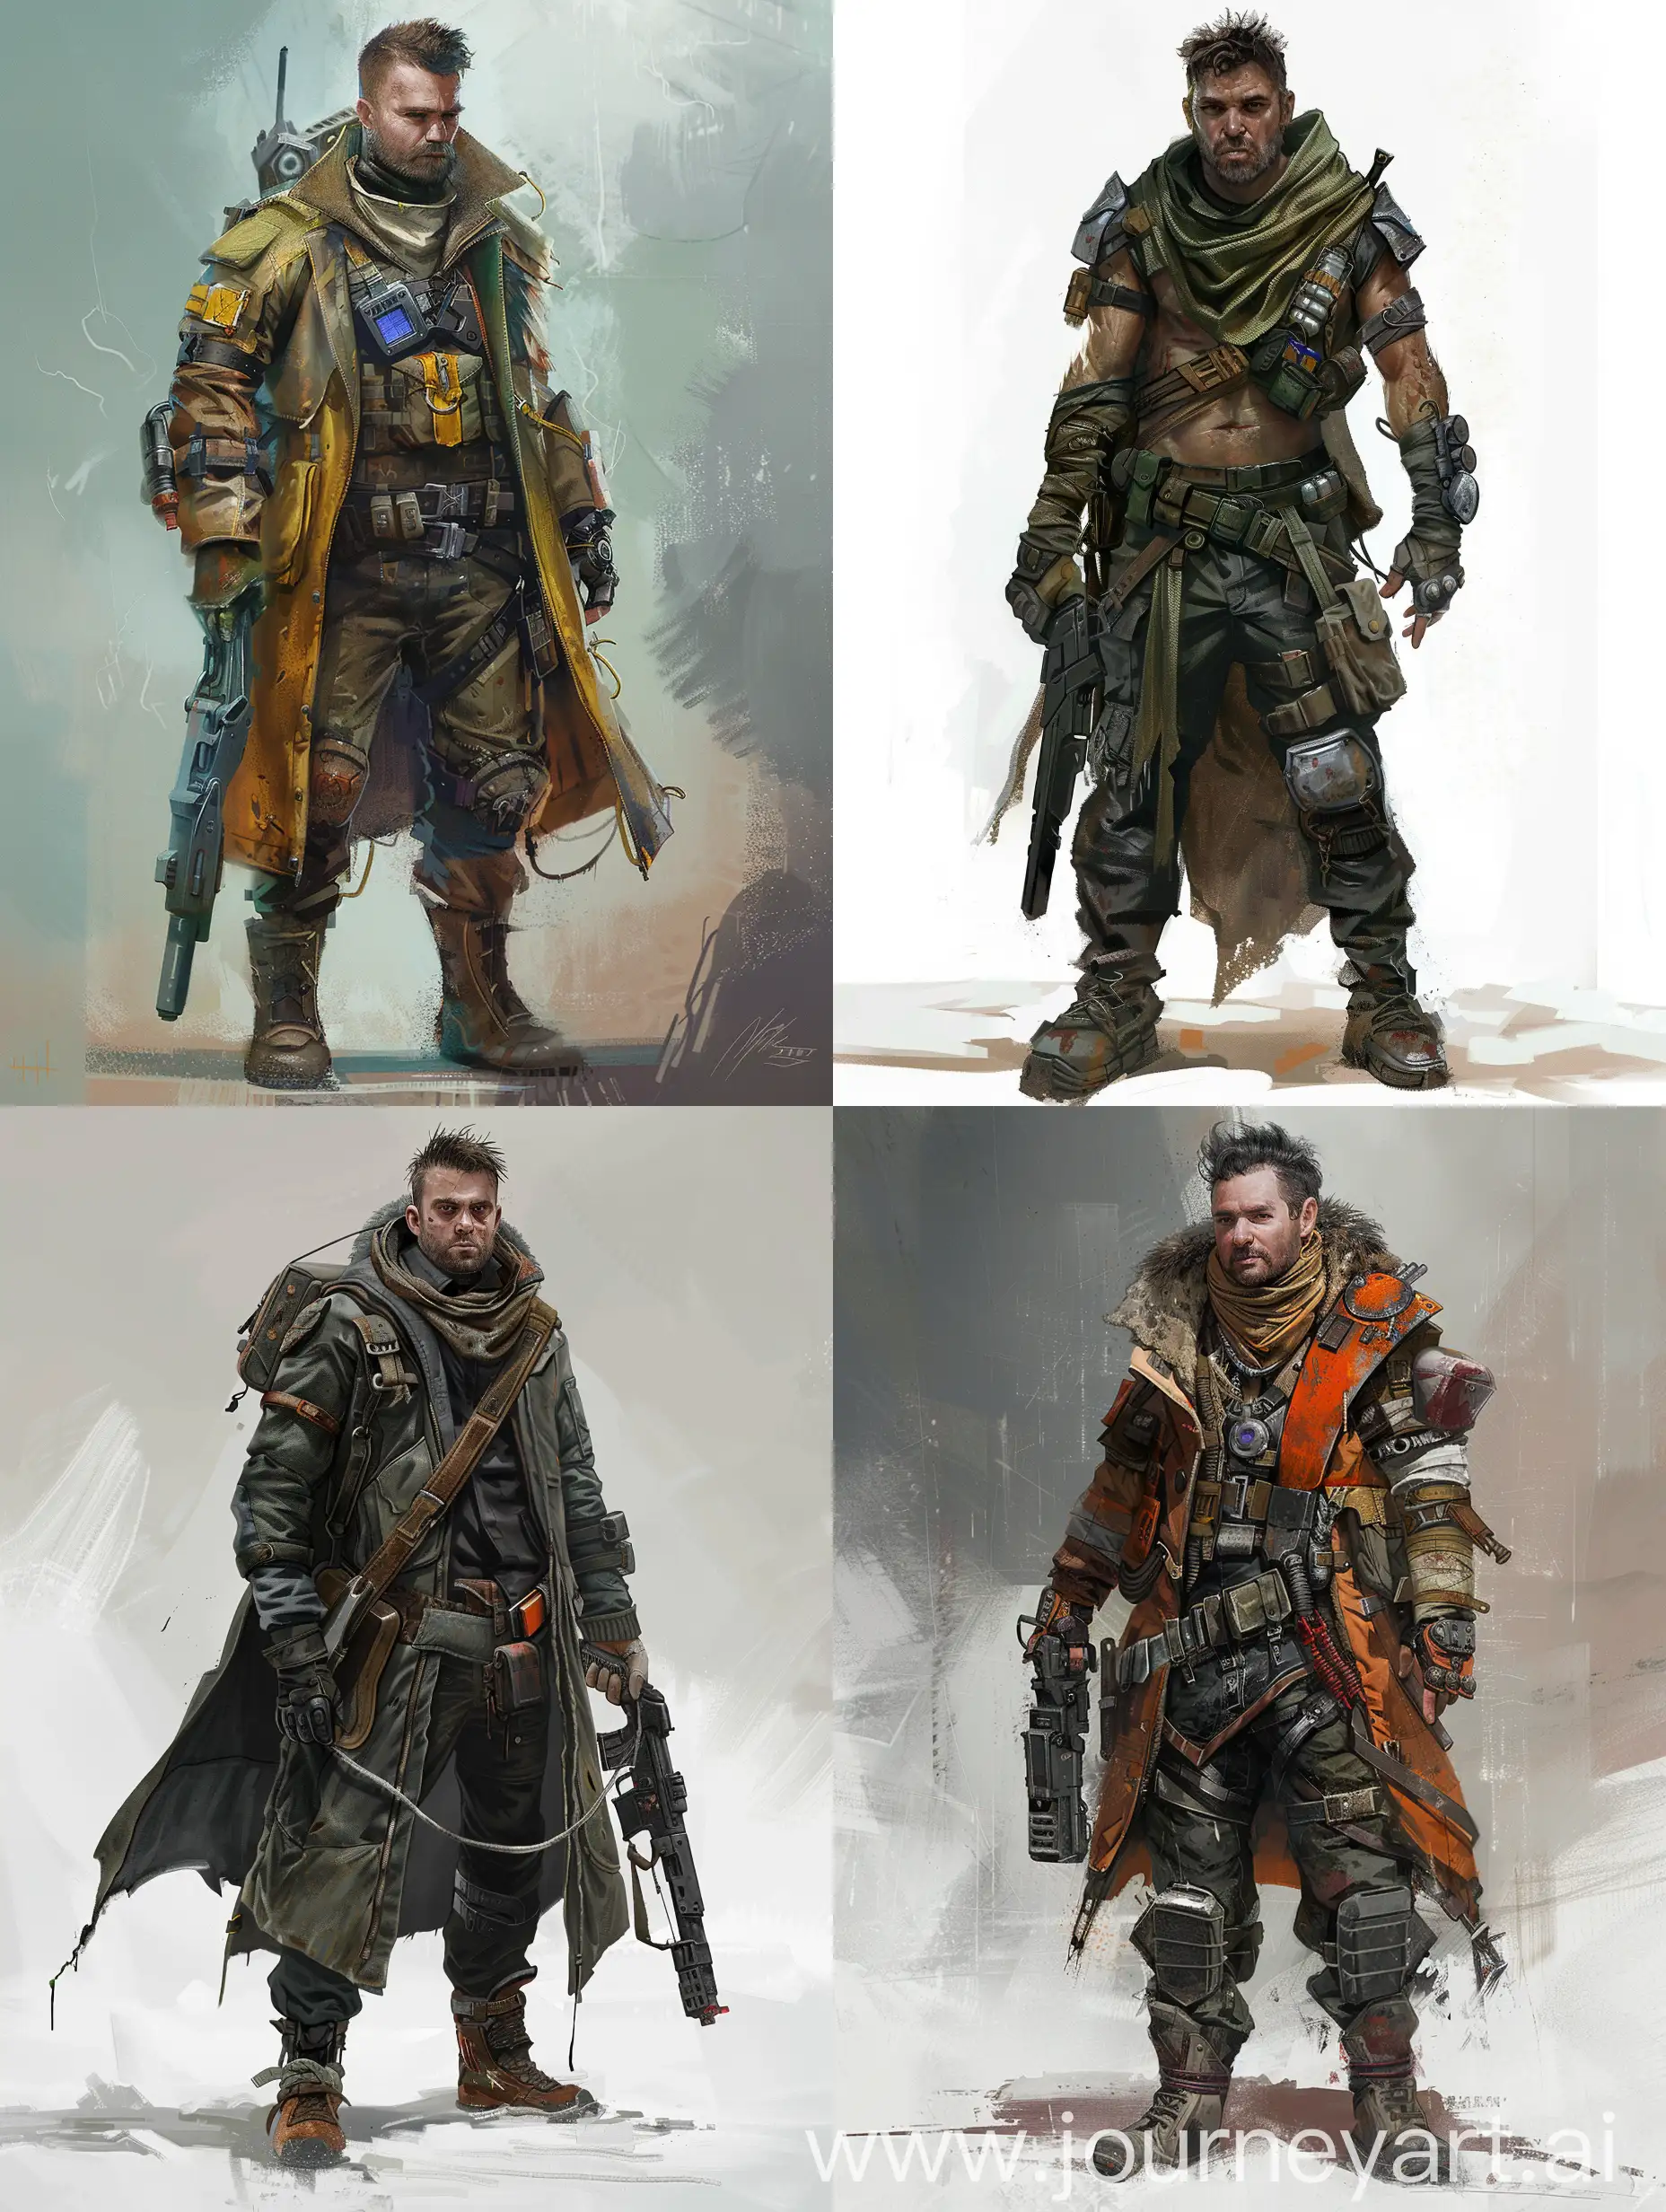 PostApocalyptic-Fantasy-RPG-Characters-Male-Warriors-in-Game-Style